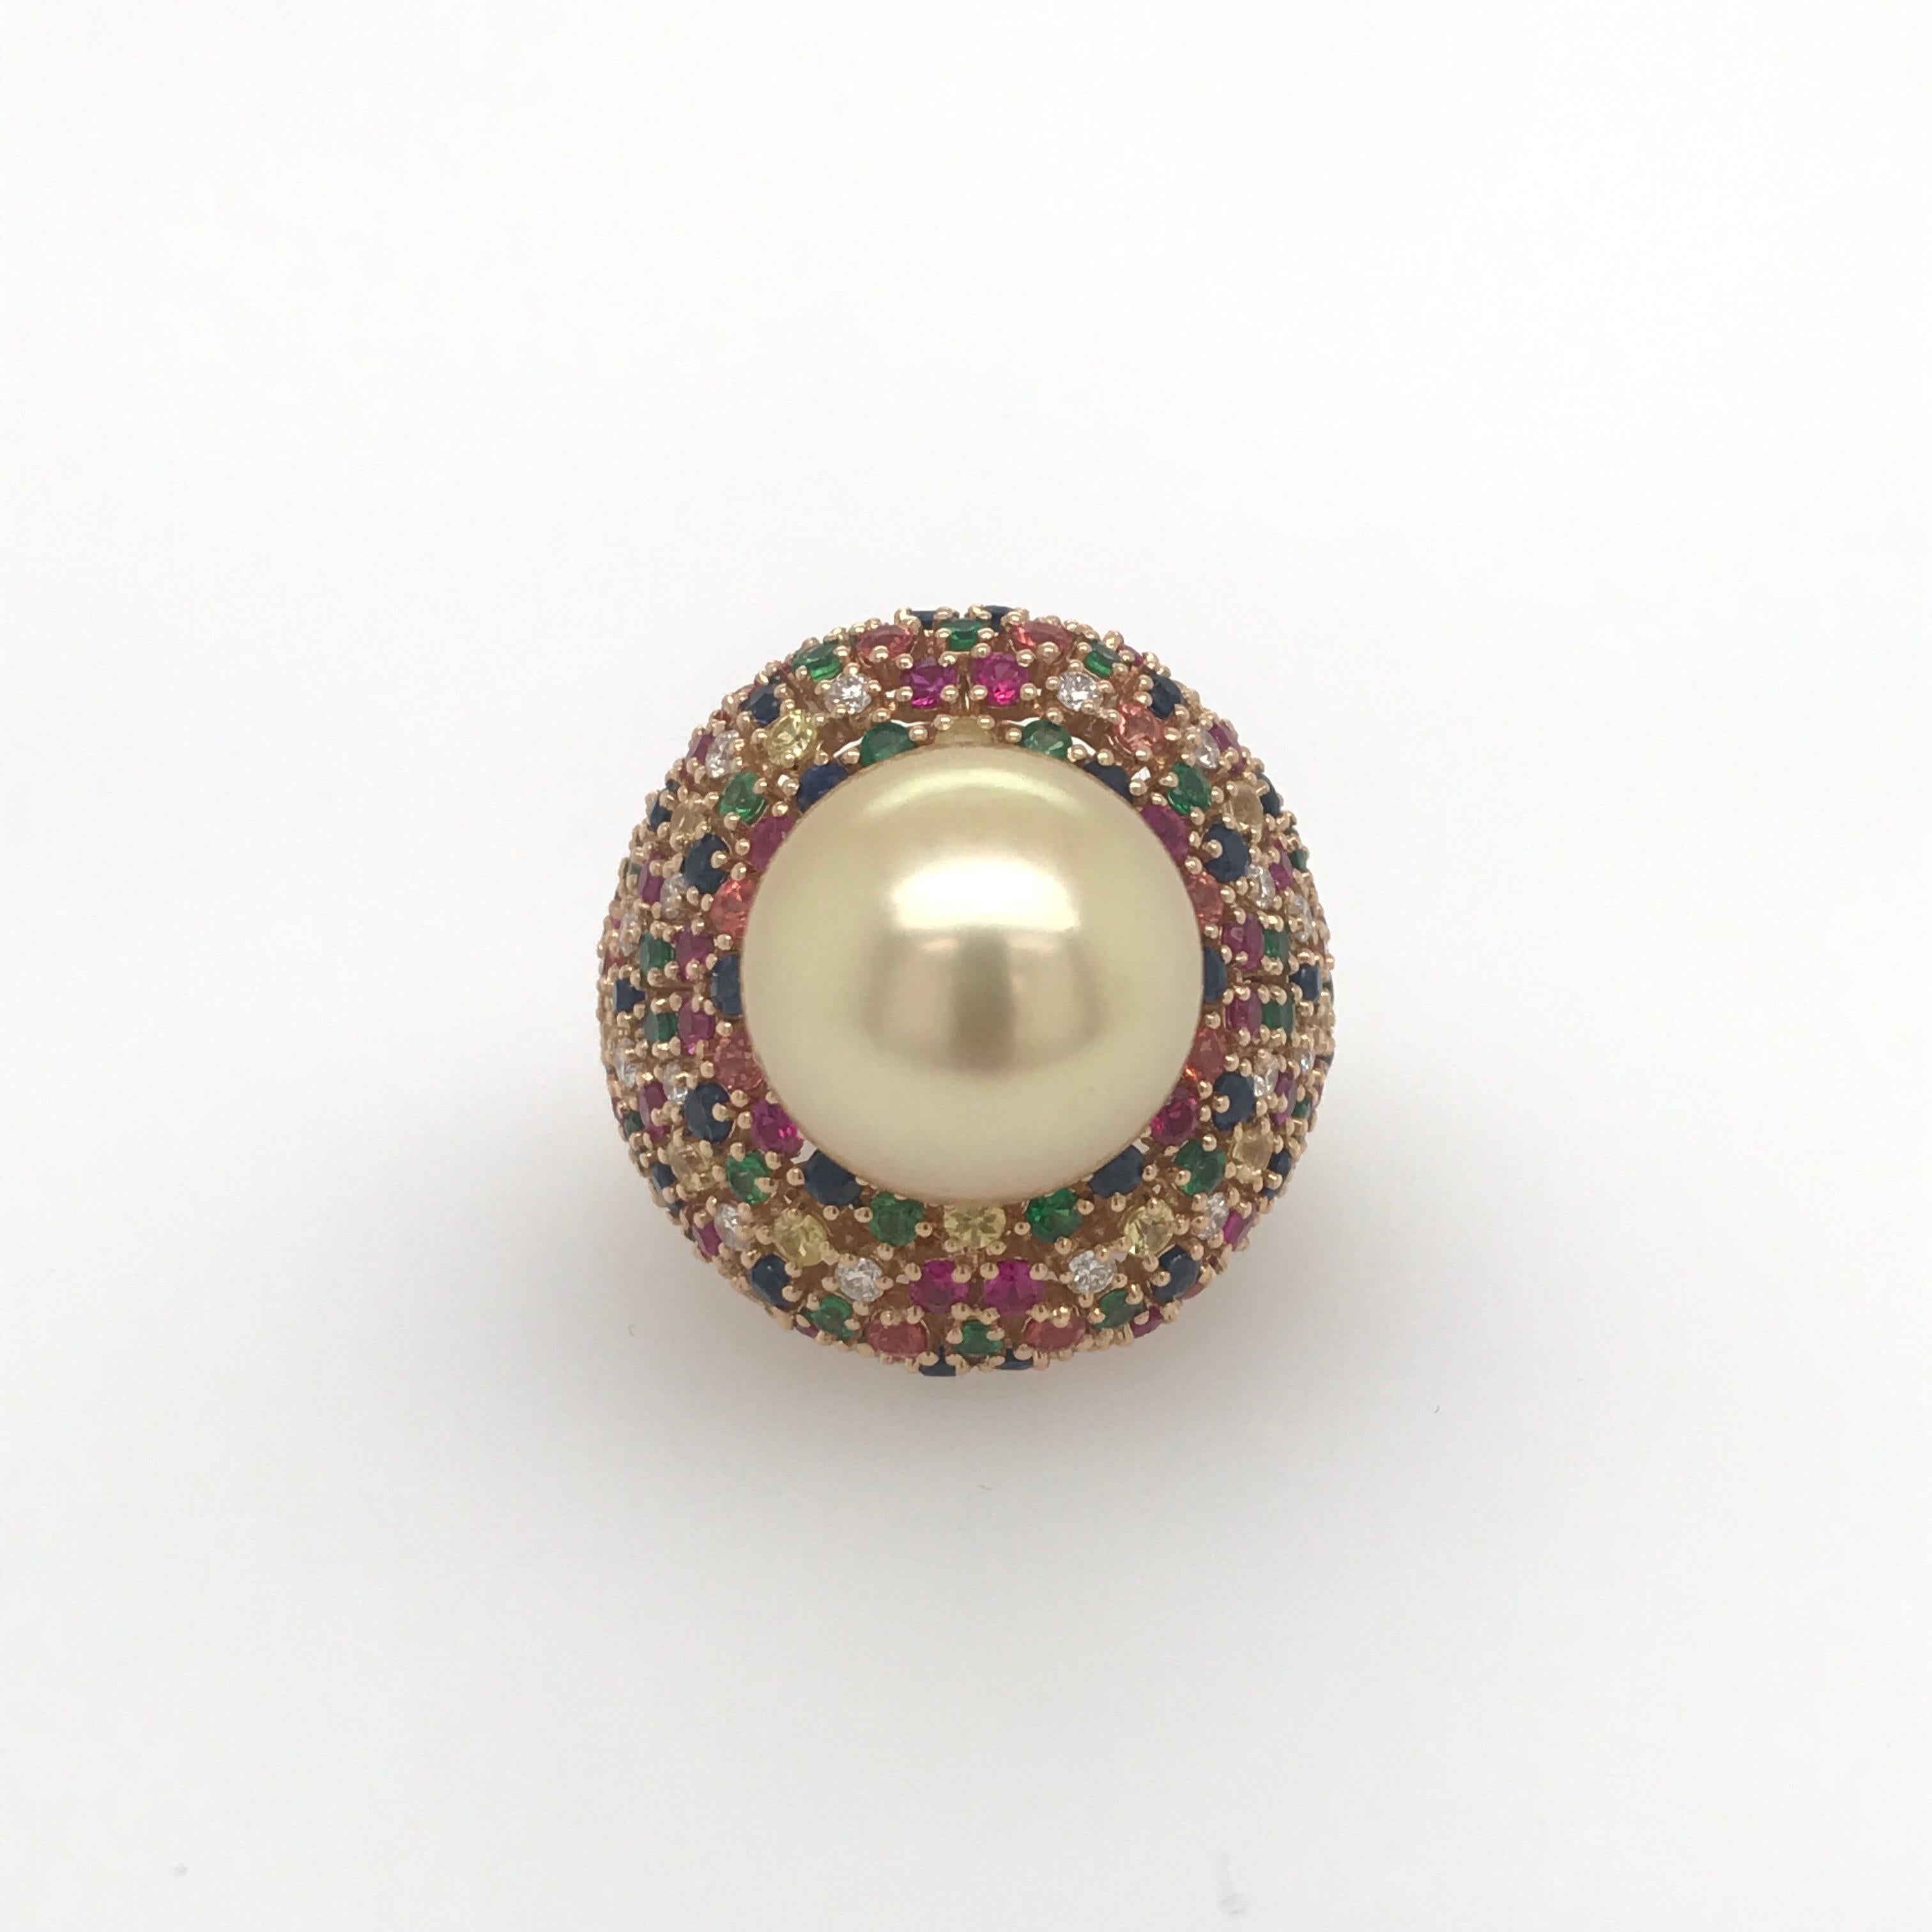 18K Yellow Gold dome ring featuring one golden pearl measuring 13-14 mm flanked with numerous multi color sapphires weighing 3.80 carats and diamonds weighing 0.46 carats. 